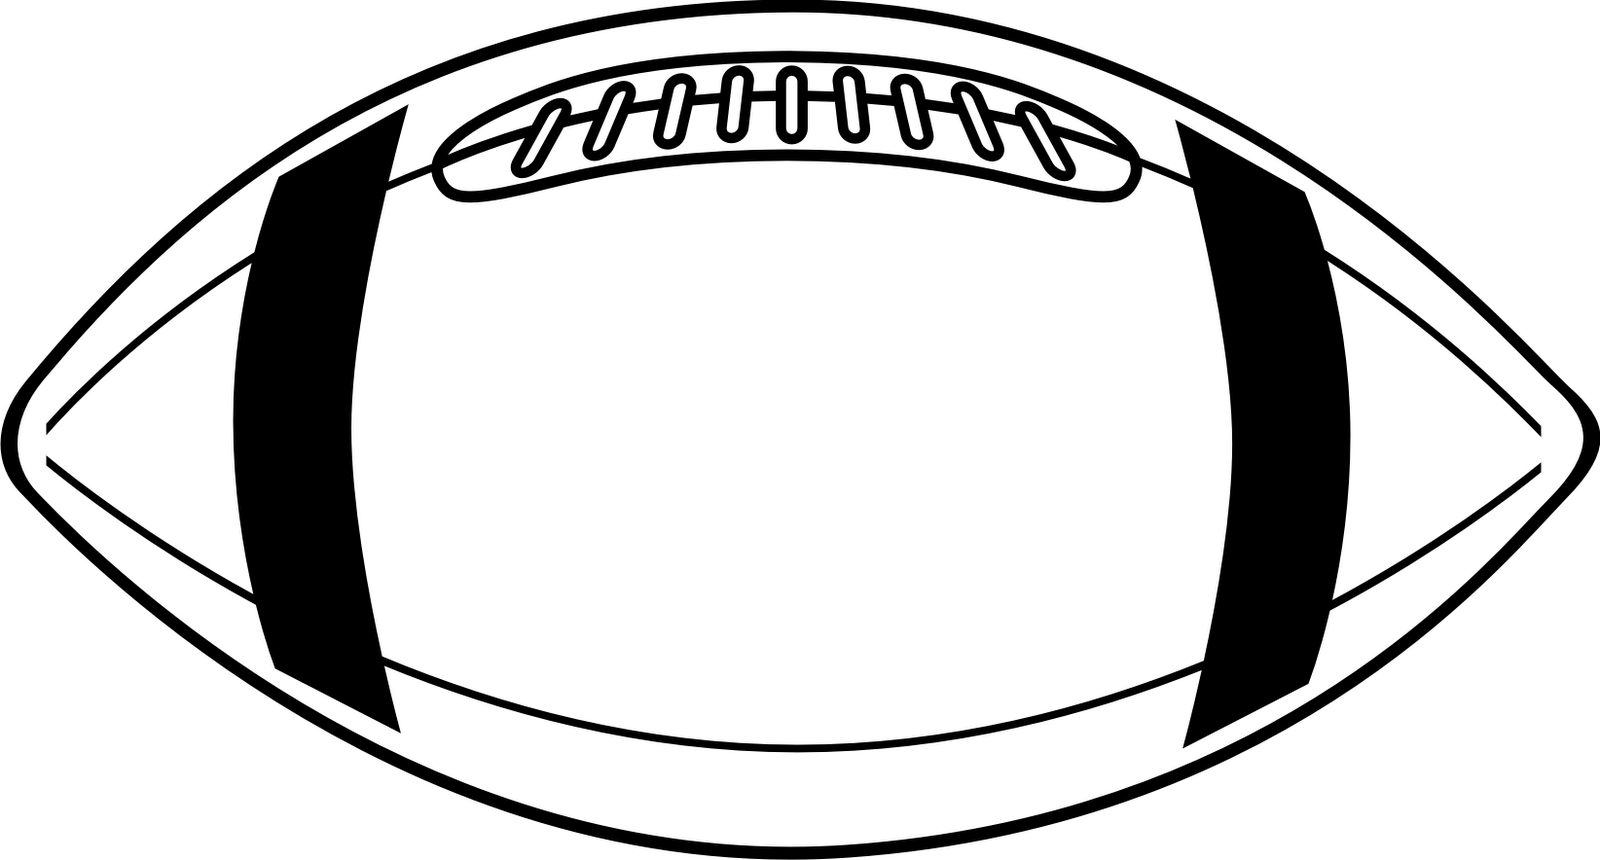 Clip Art Football Field Black And White | Clipart library - Free 